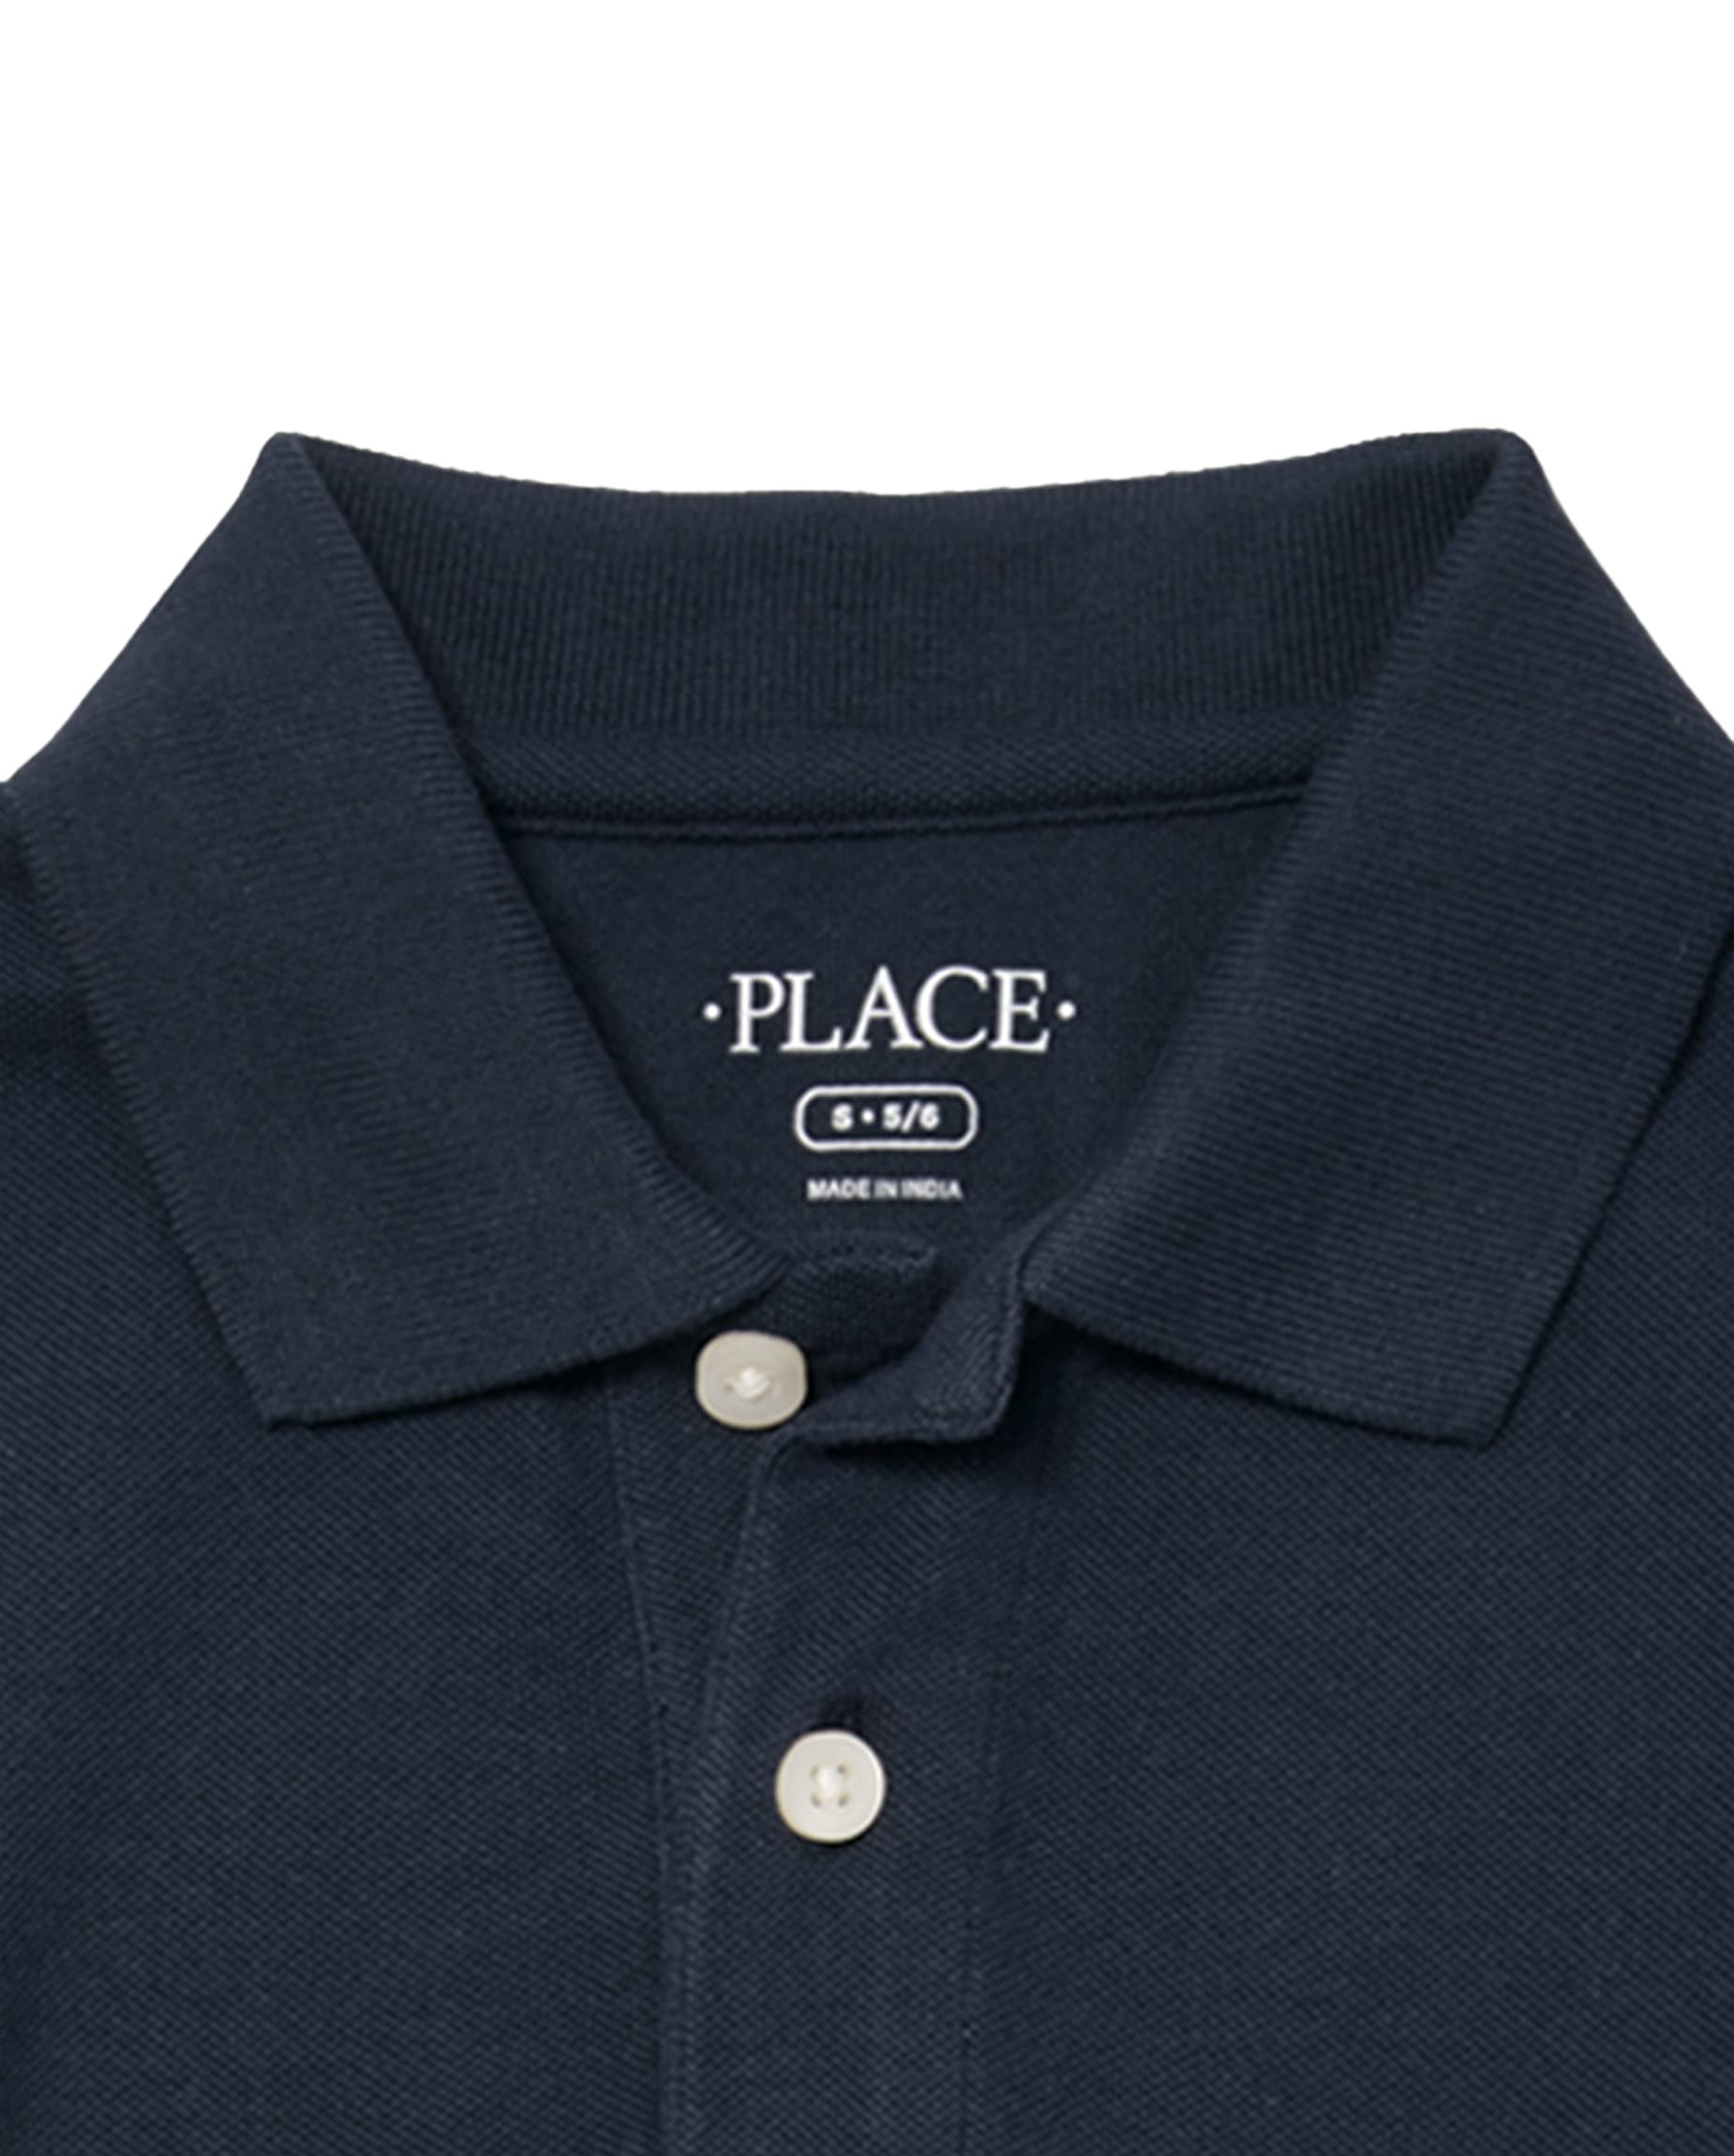 The Children's Place Boys' and Toddler Short Sleeve Polos